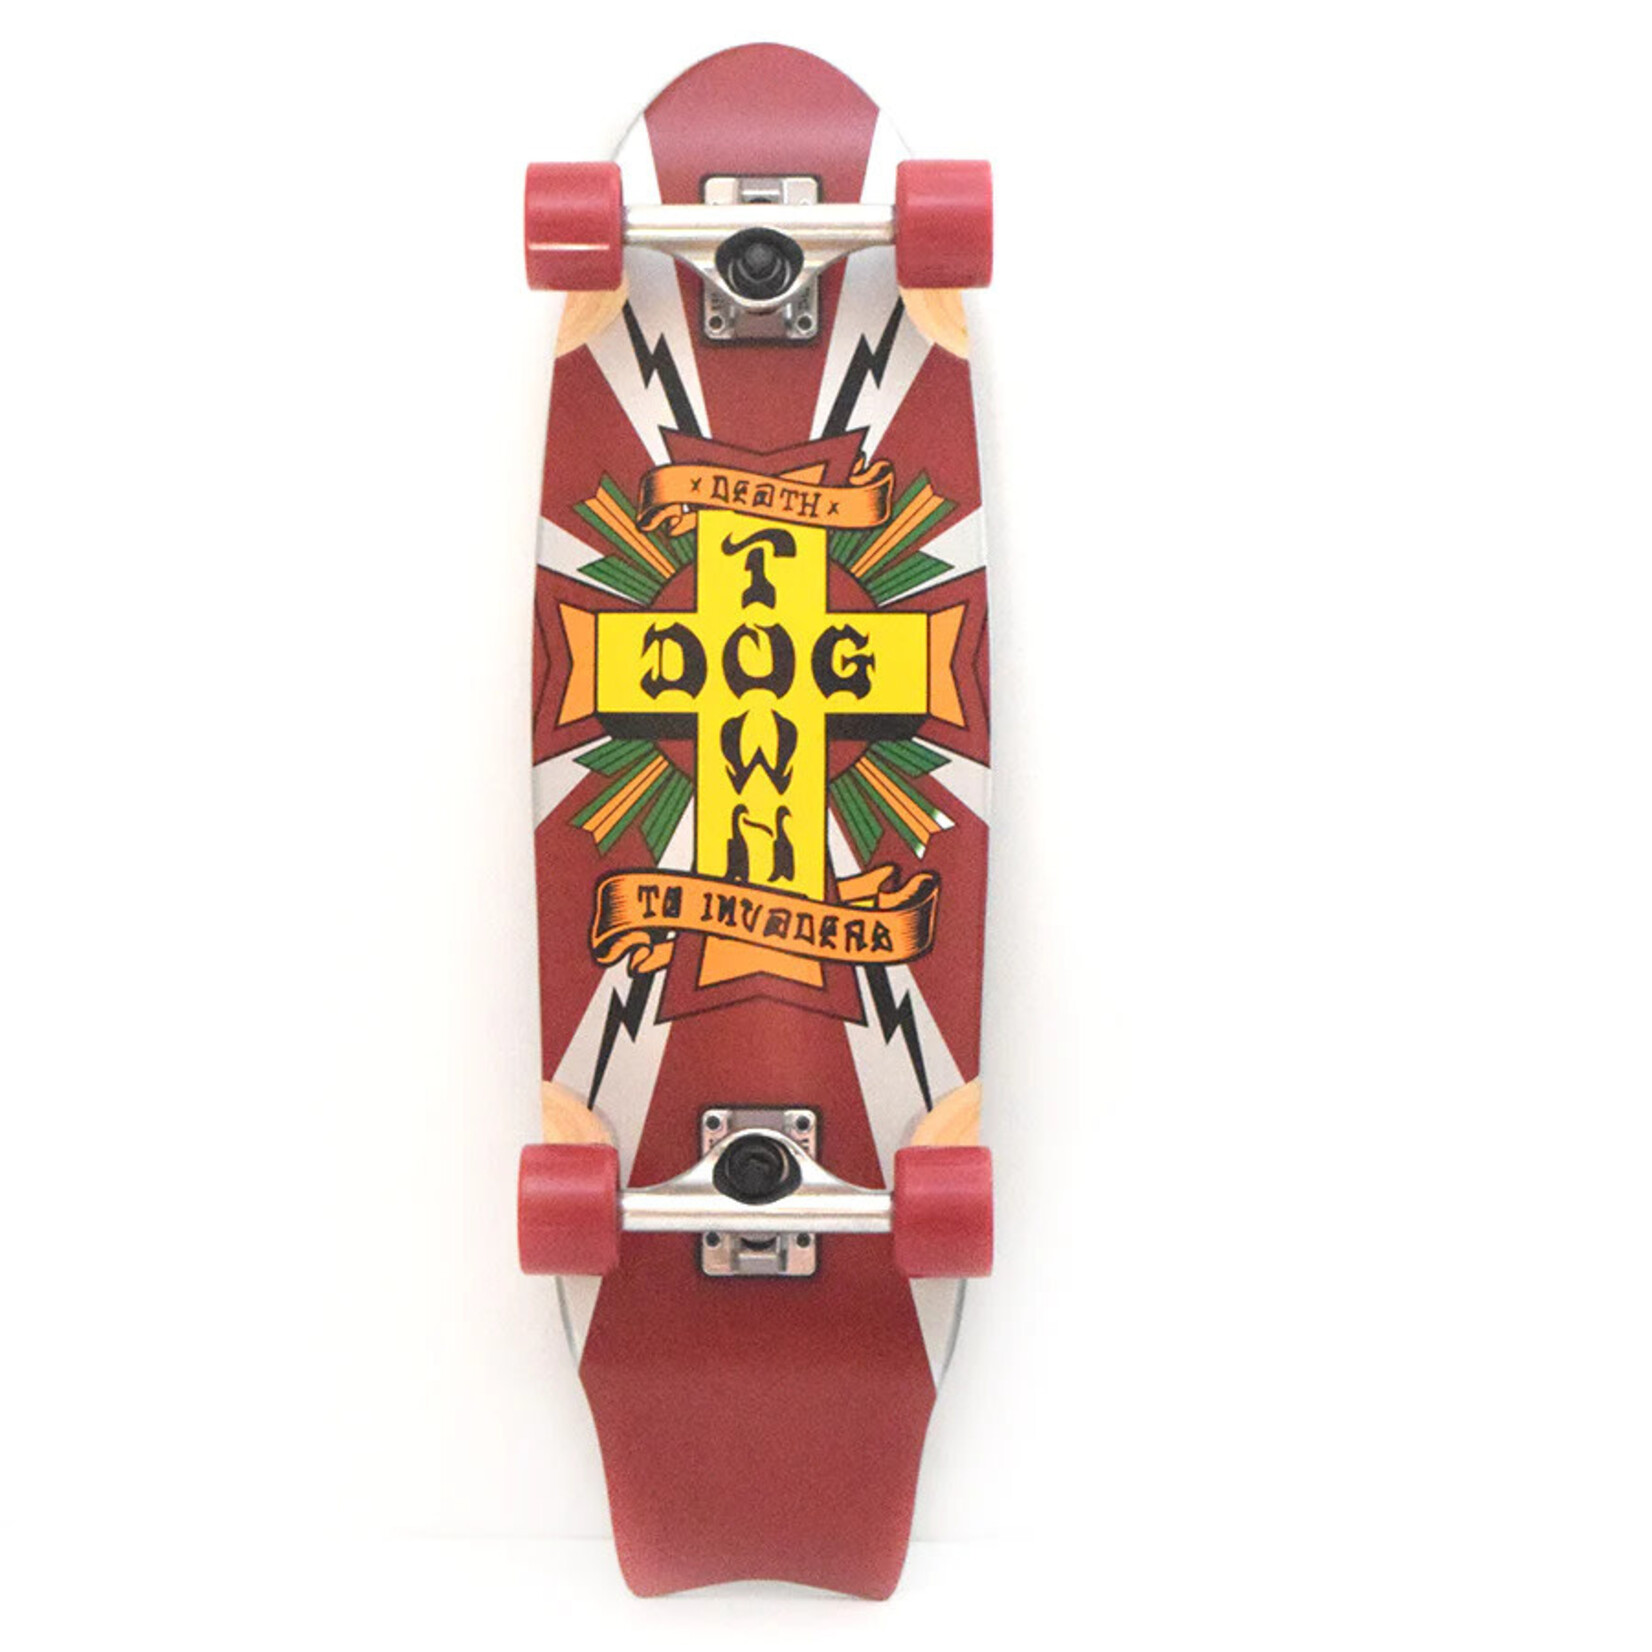 Dogtown Dogtown Death To Invaders Mini Cruiser Complete - 8.5" x 28.75"